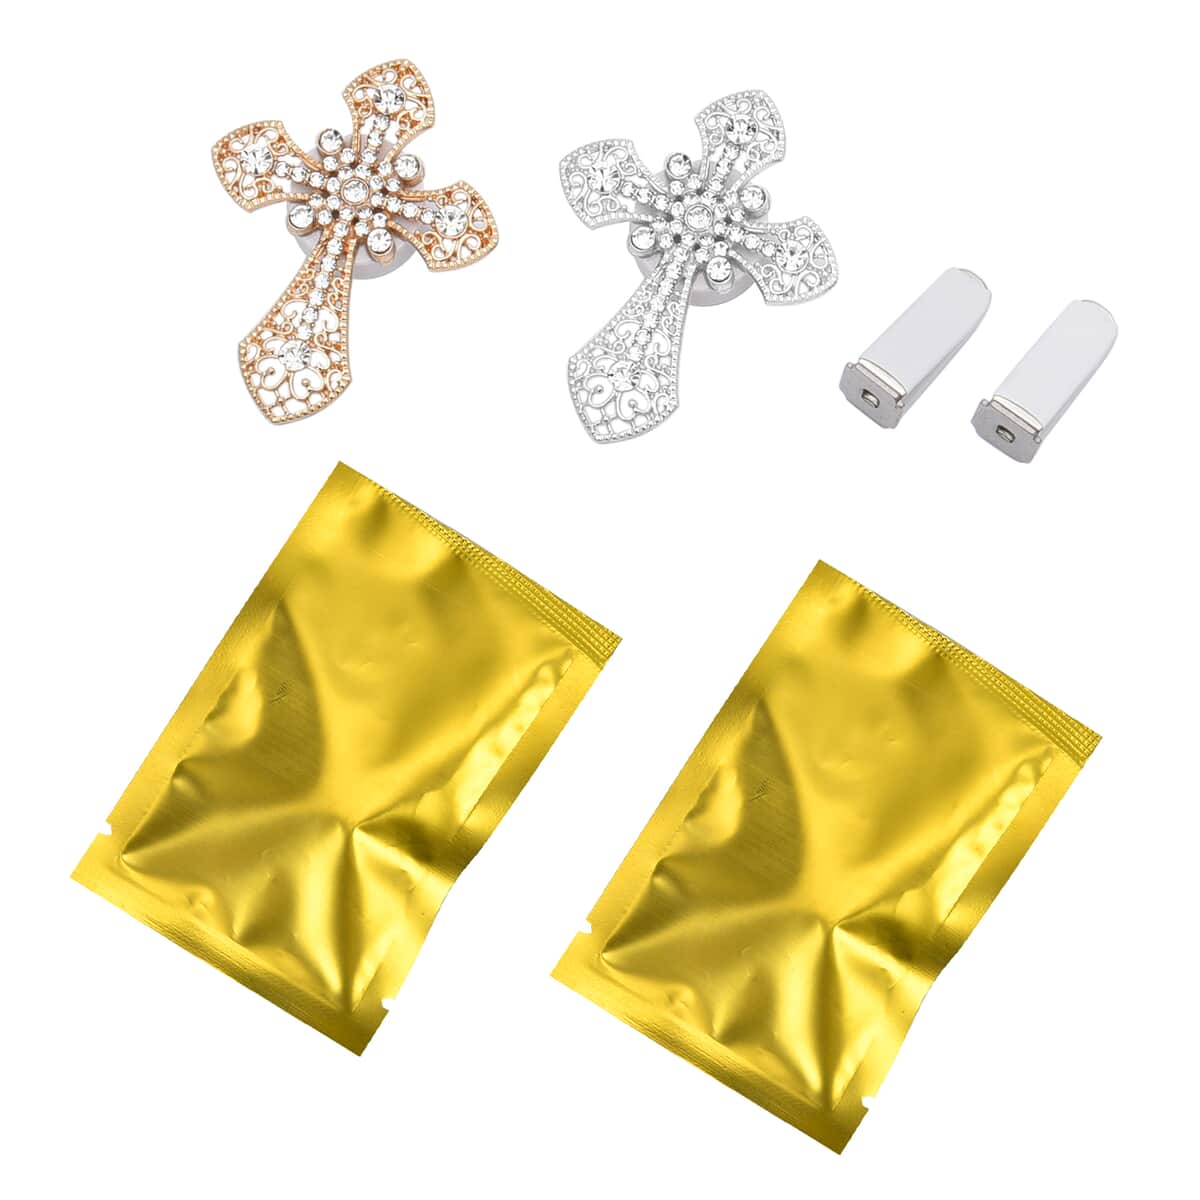 Set of 2 Gold and Silver Cross Inspired Vent Clip Freshener (2.16"x2.75") image number 5